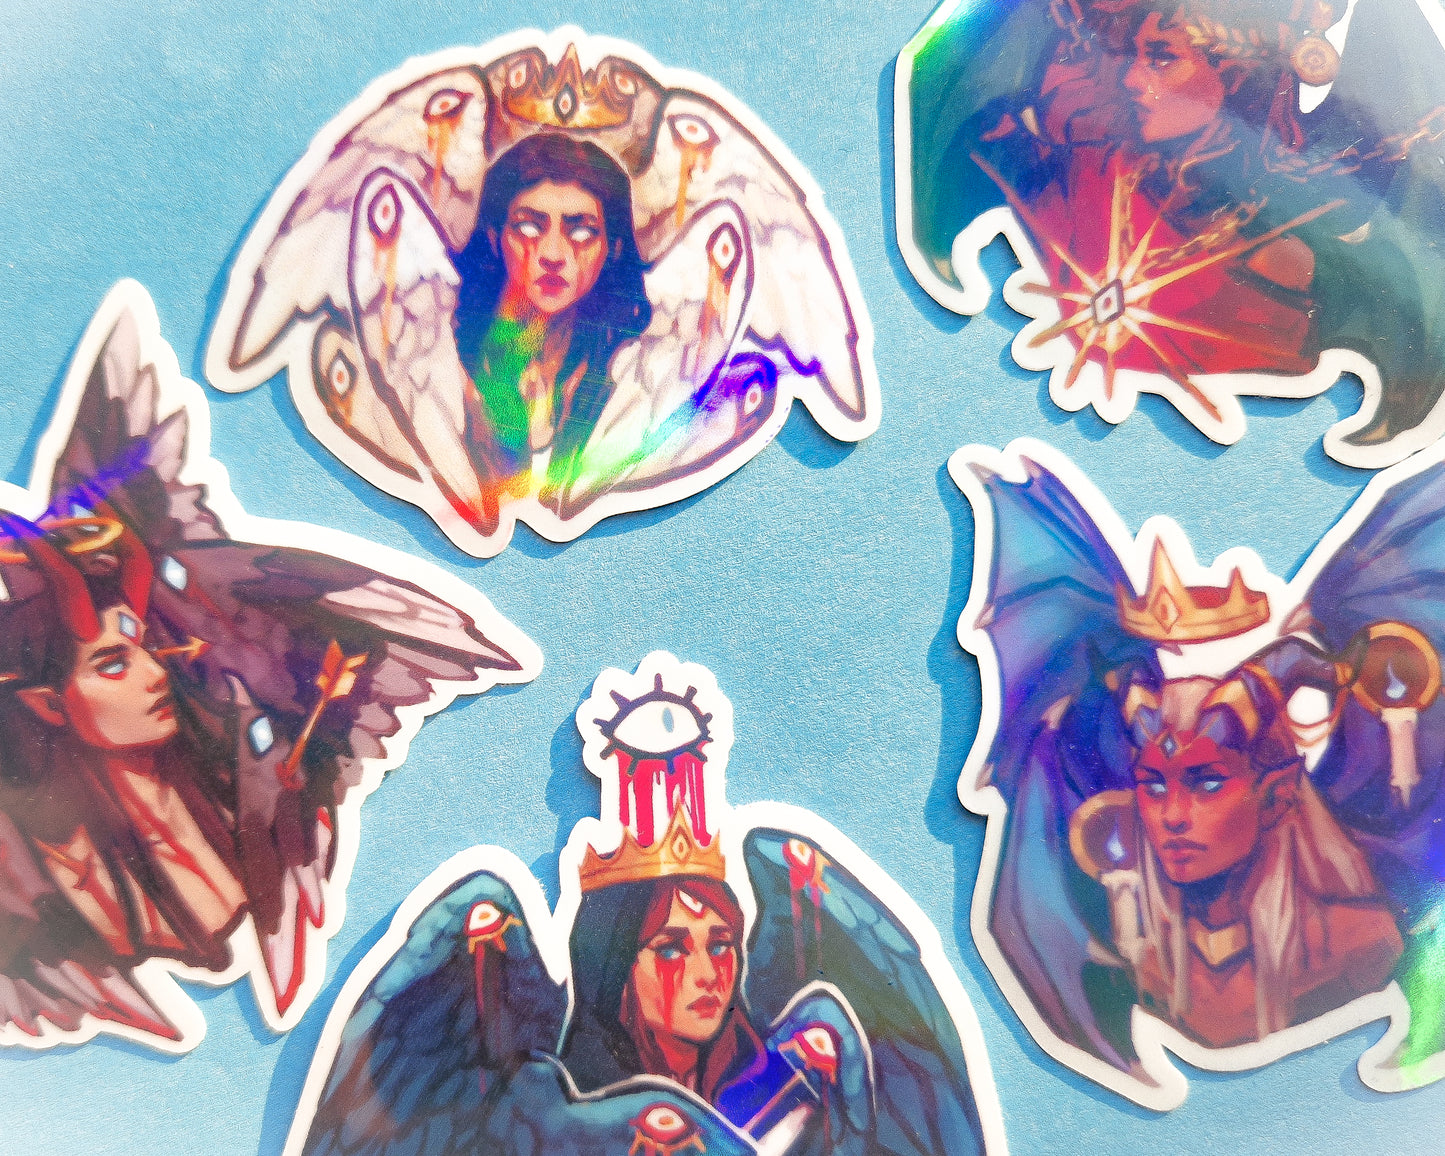 Angels and Demons Sticker Pack - 5 Holographic Vinyl Stickers